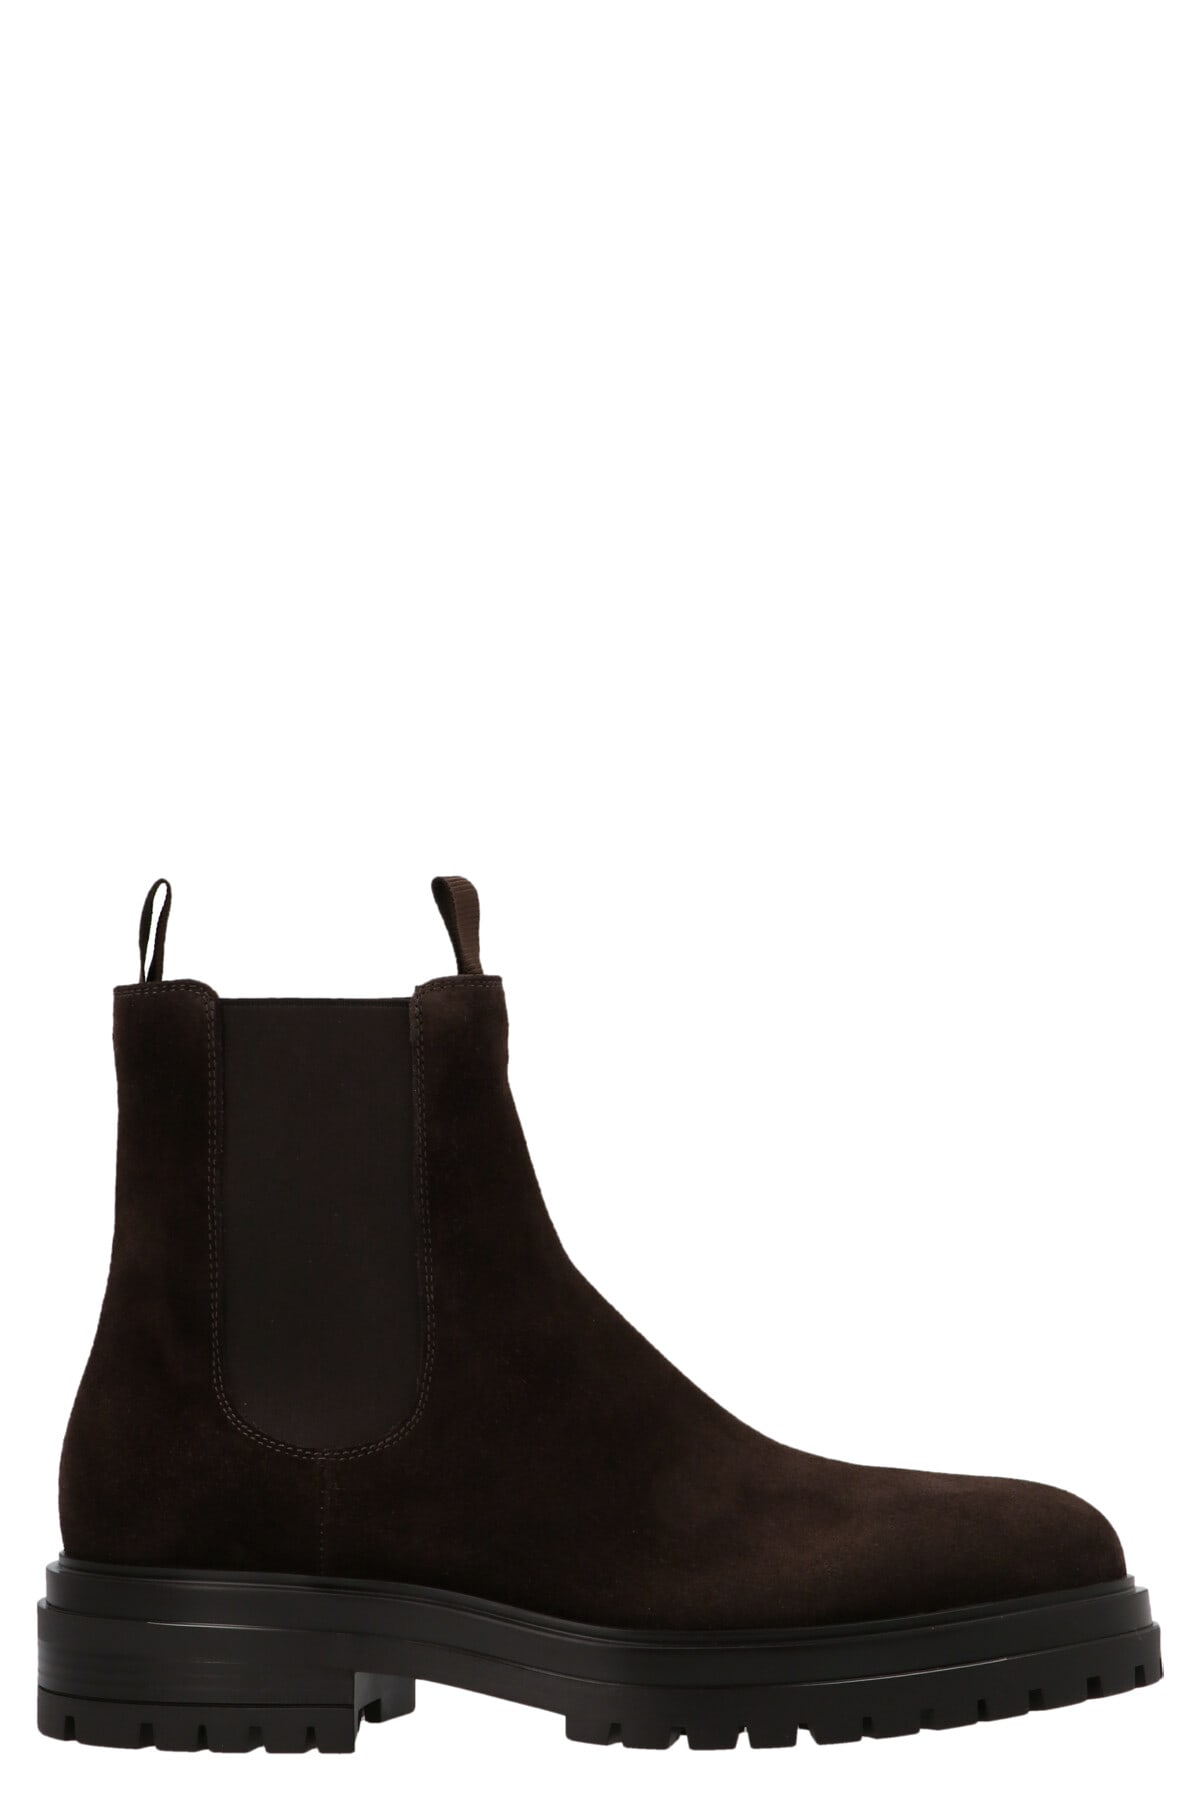 GIANVITO ROSSI CHESTER ANKLE BOOTS